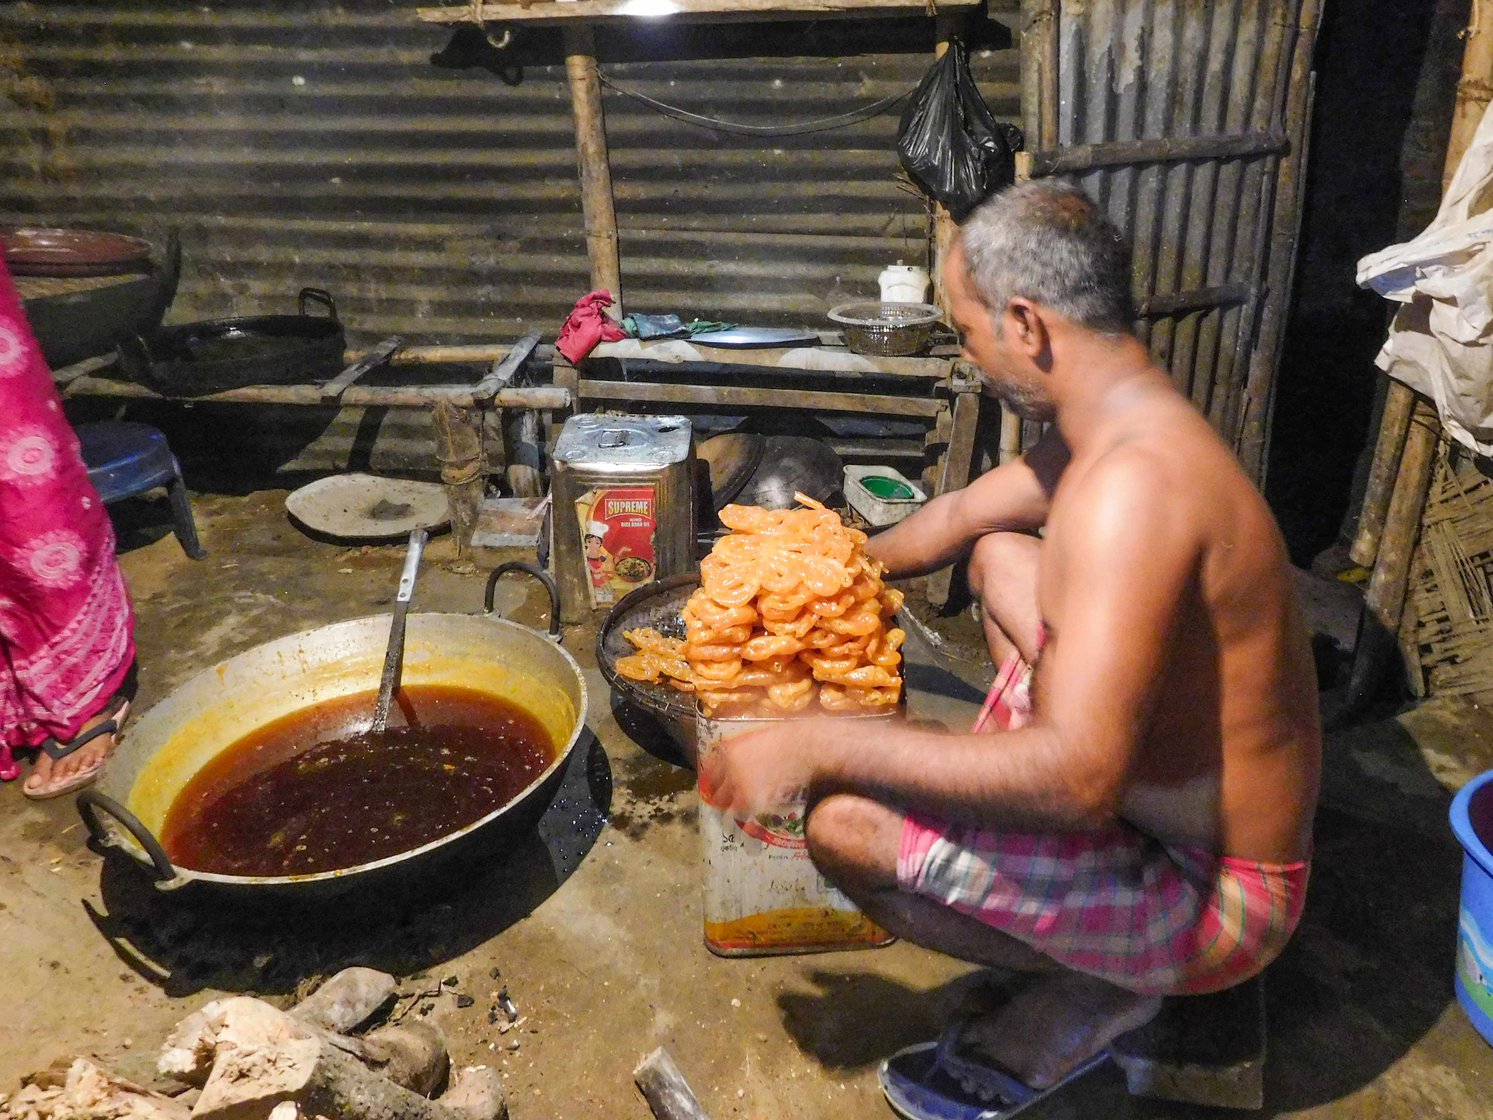 Nosumuddin starts preparing crunchy jalebis before dawn. Recalling his days as a cowherd, he says: ‘I would get tired working all day, and at night if not given enough food or given stale food, how would you feel? I felt helpless’